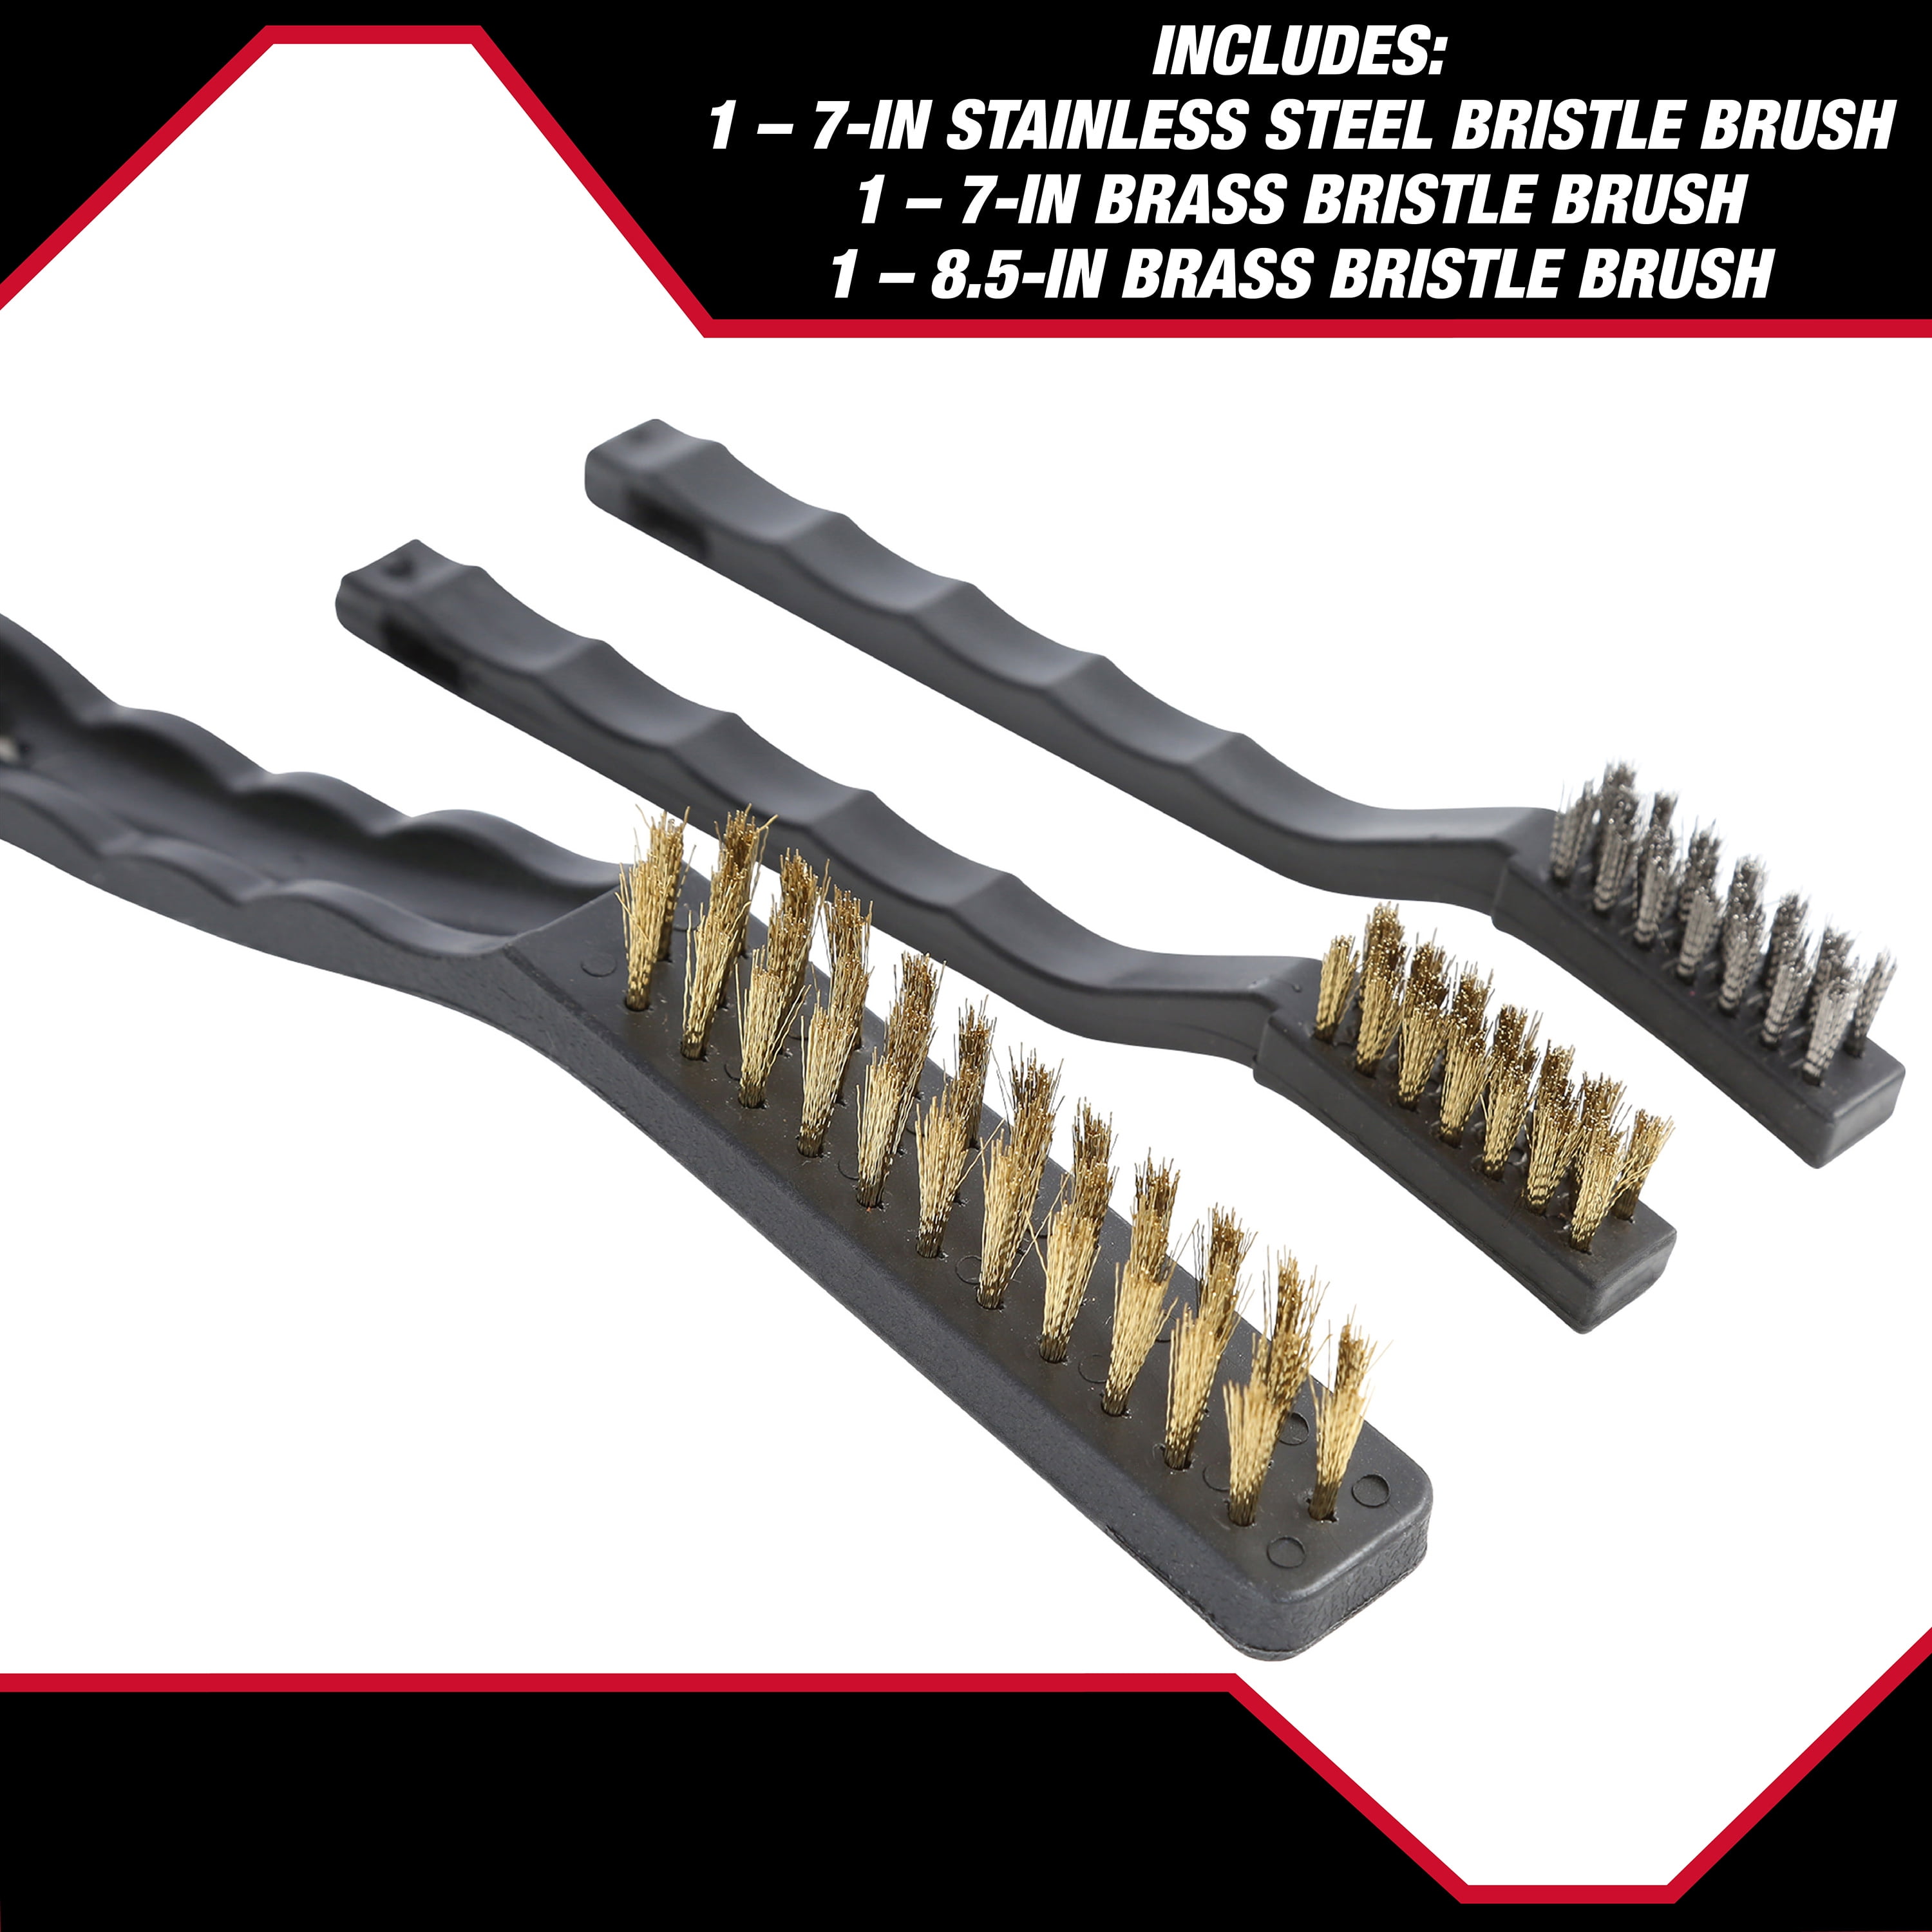 3 Piece Heavy Duty Wire Brushes